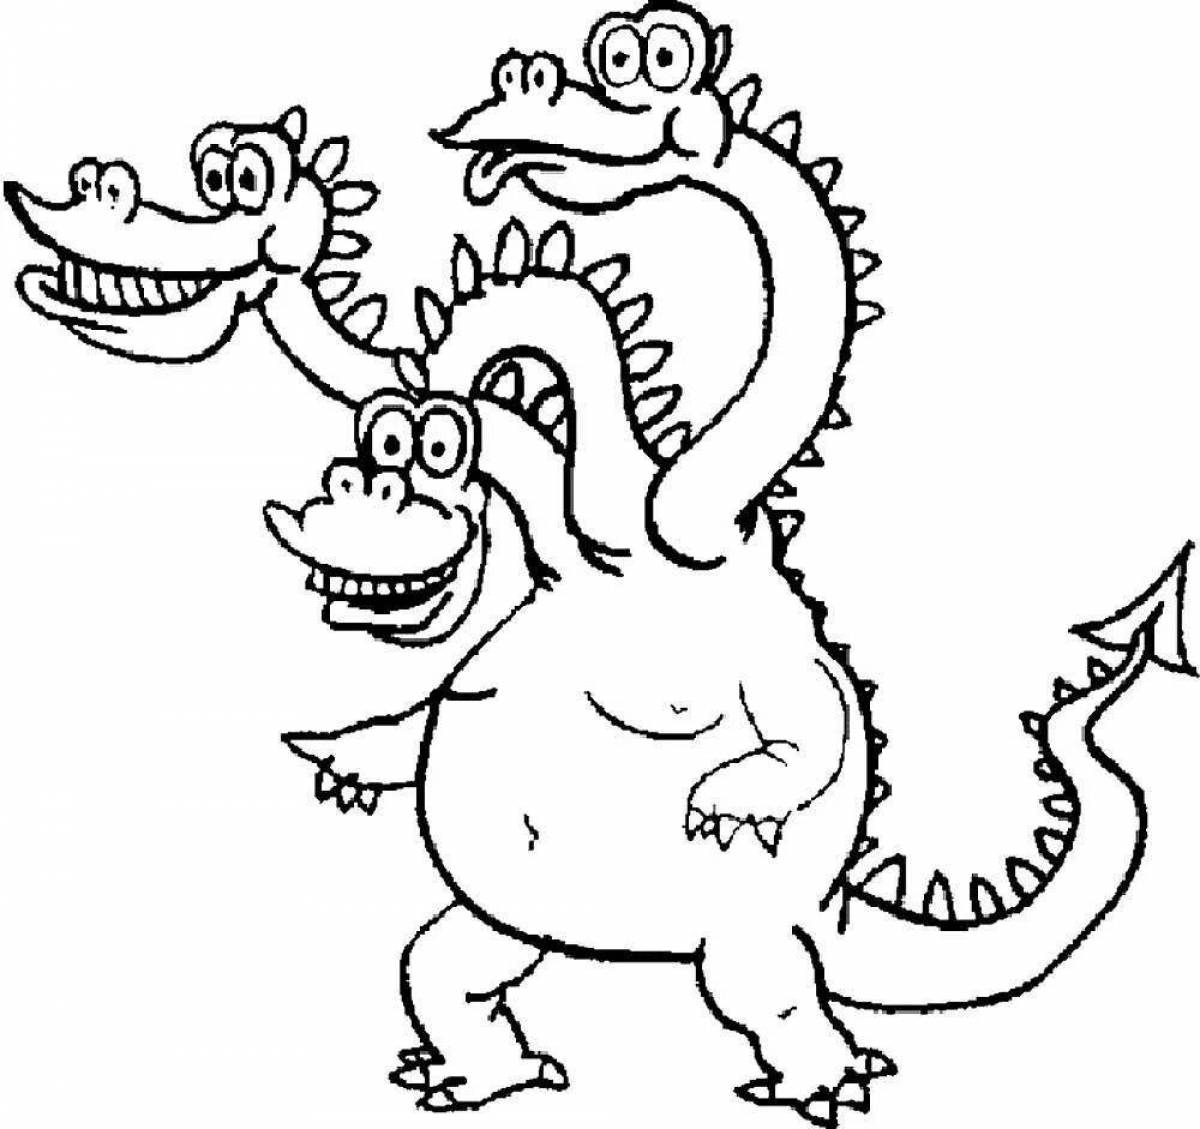 Coloring page formidable six-headed serpent